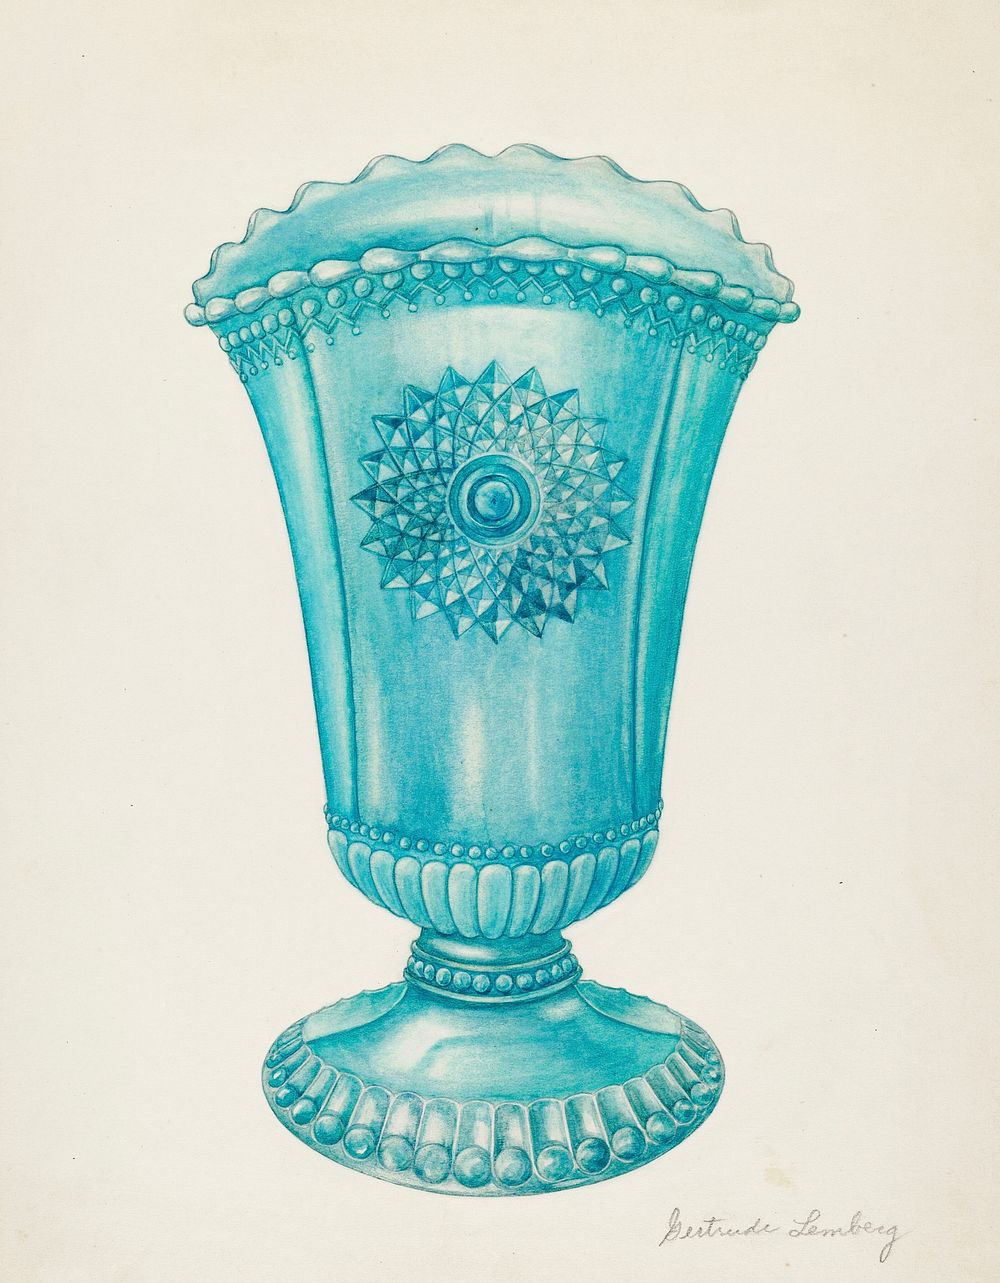 Vase (1935&ndash;1942) by Gertrude Lemberg. Original from The National Gallery of Art. Digitally enhanced by rawpixel.